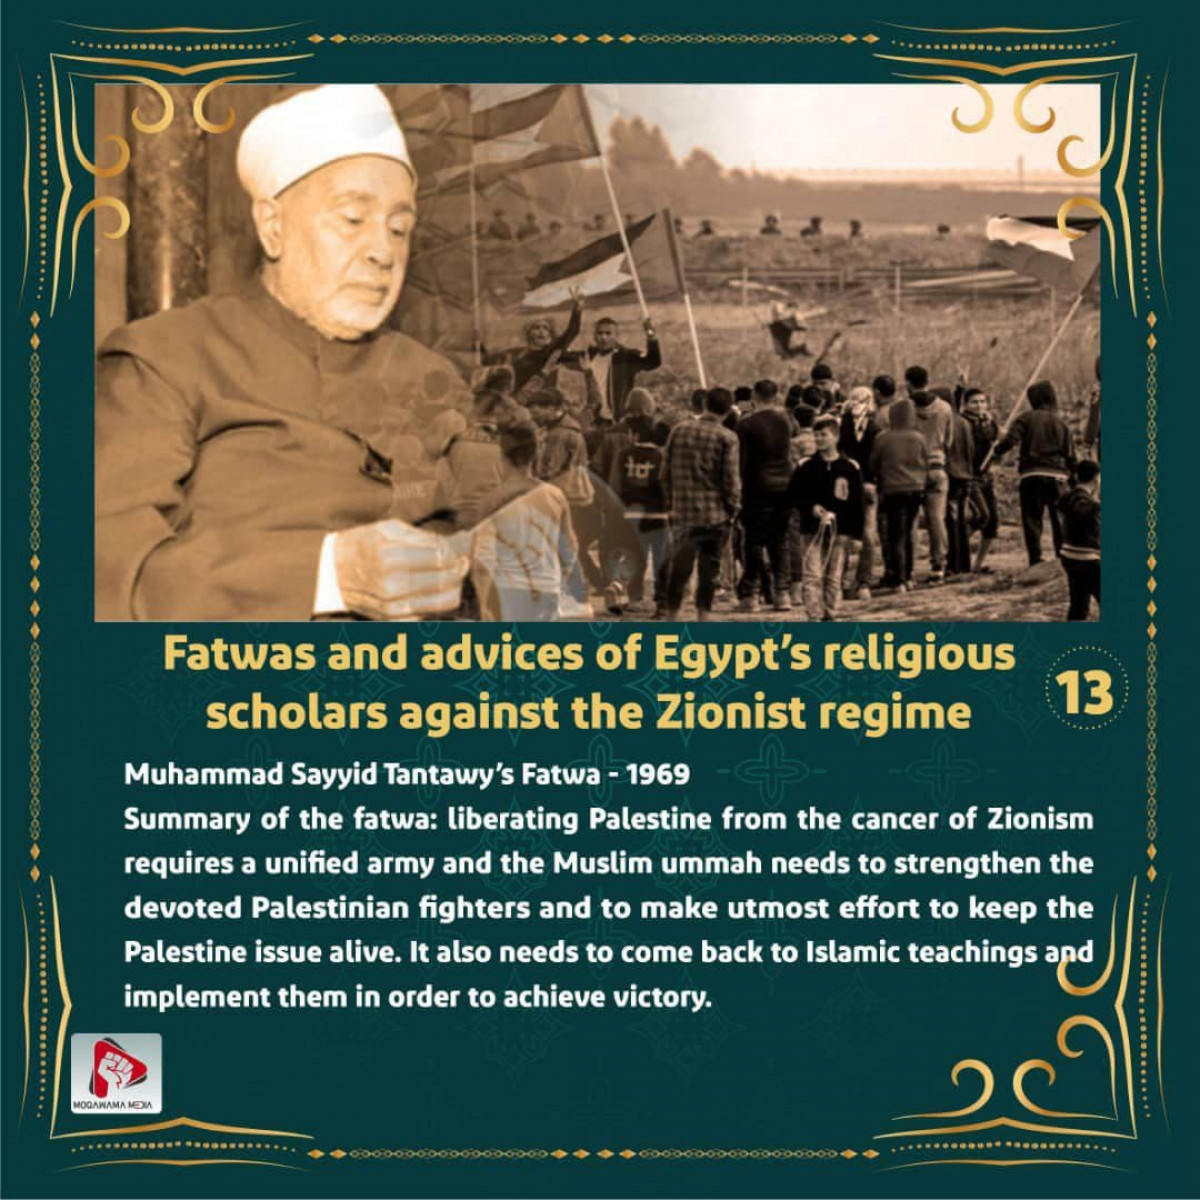 Fatwas and advices of Egypt's religious scholars against the Zionist regime 13